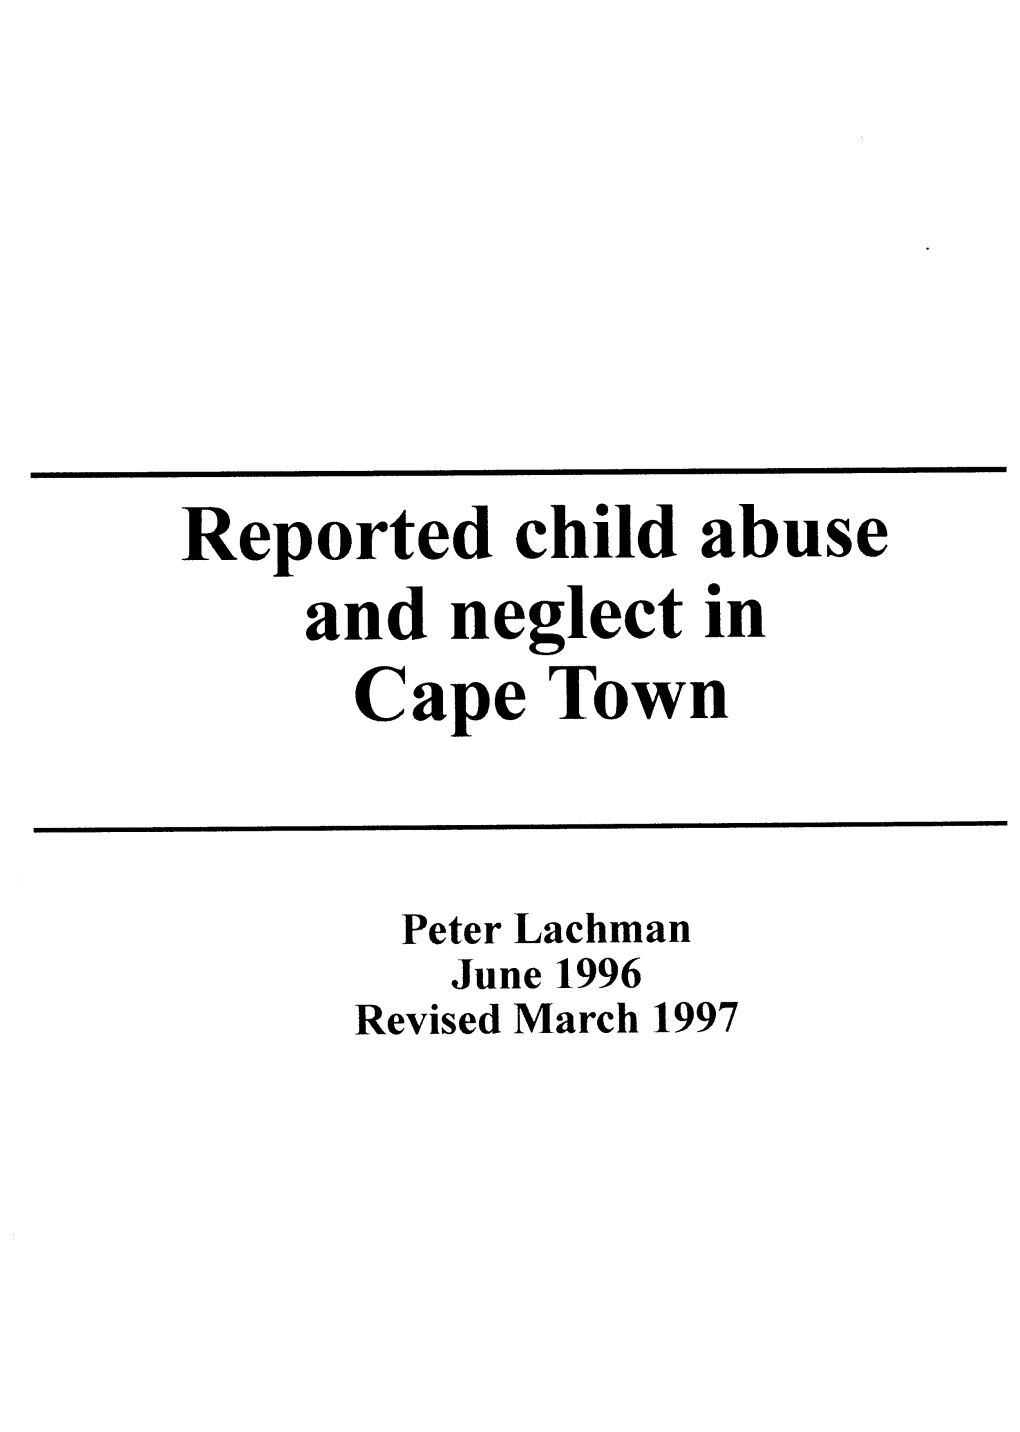 Reported Child Abuse and Neglect in Cape Town